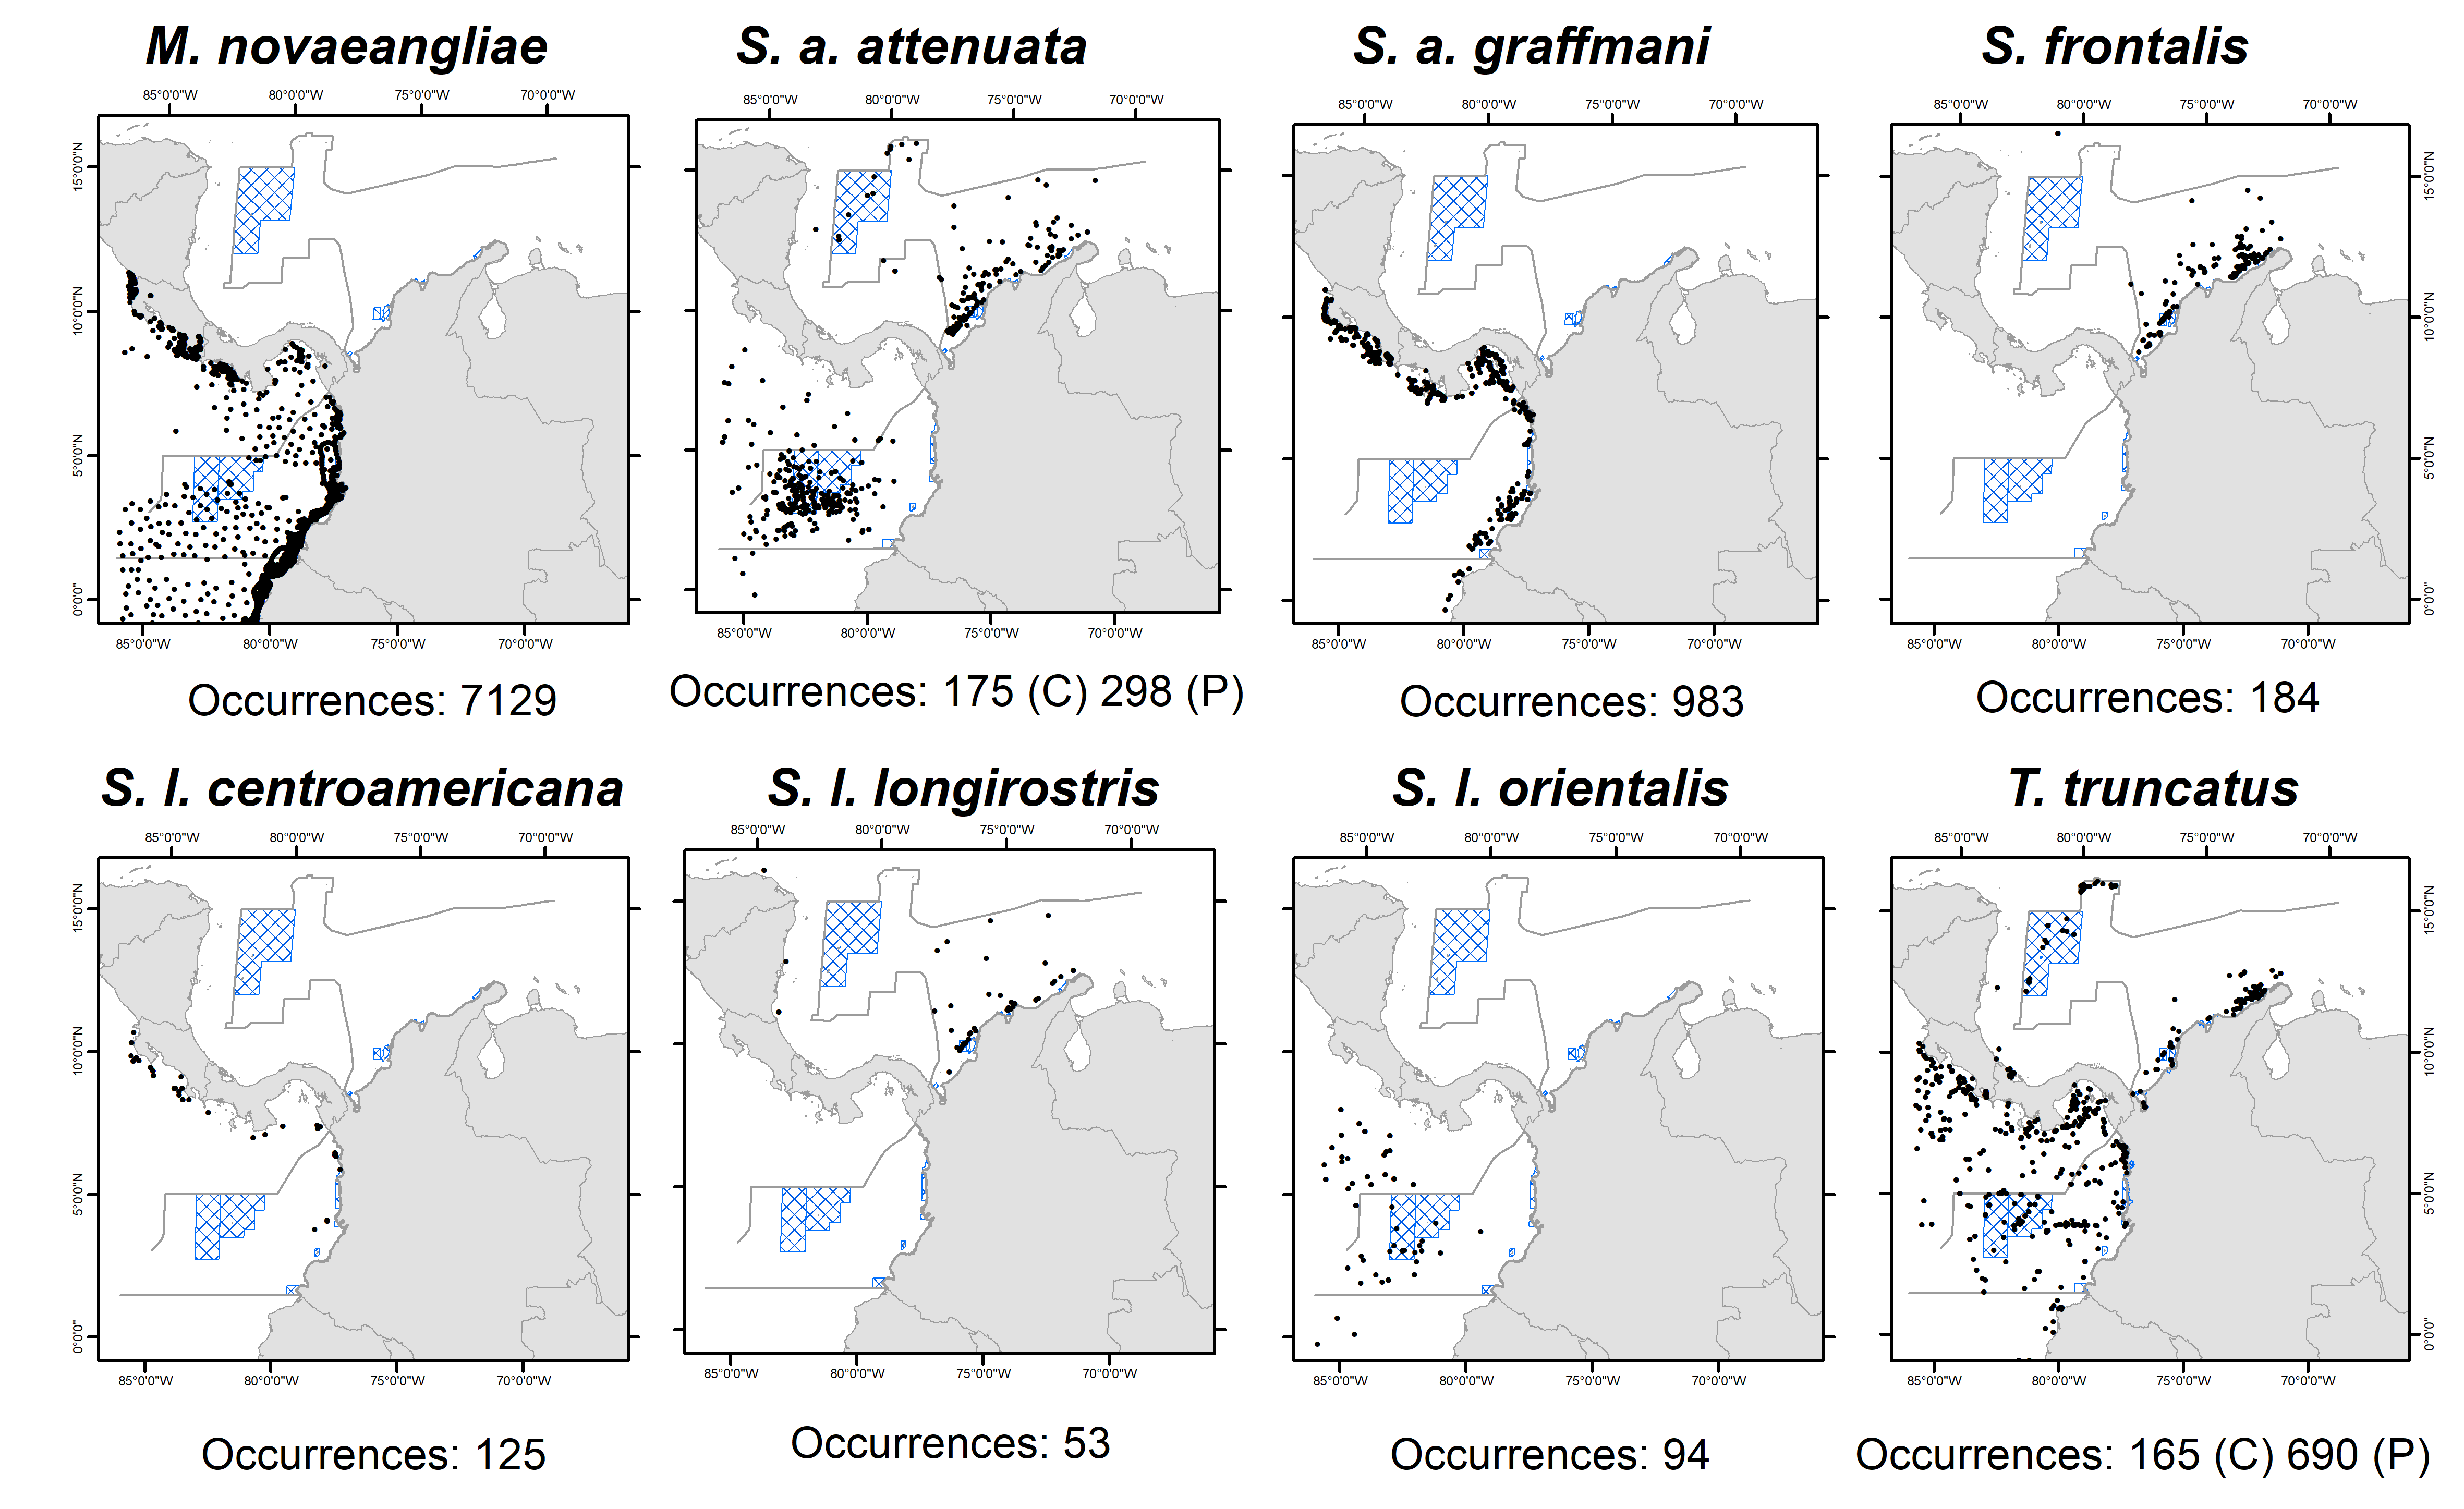 **Figure 2.** Number and locations of cetacean species/subspecies records reported in the Colombian Caribbean and Pacific basins. Occurrences of humpback whale (*Megaptera novaeangliae*); pantropical spotted dolphin’s subspecies: offshore pantropical spotted (*Stenella attenuata attenuata*) and coastal pantropical spotted (*Stenella attenuata graffmani*); Atlantic spotted dolphins (*Stenella frontalis*); spinner dolphin’s subspecies: Central American spinner (*Stenella longirostris centroamericana*), Gray’s spinner (*Stenella longirostris longirostris*), and Eastern spinner (*Stenella longirostris orientalis*); and bottlenose dolphins (*Tursiops truncatus*).